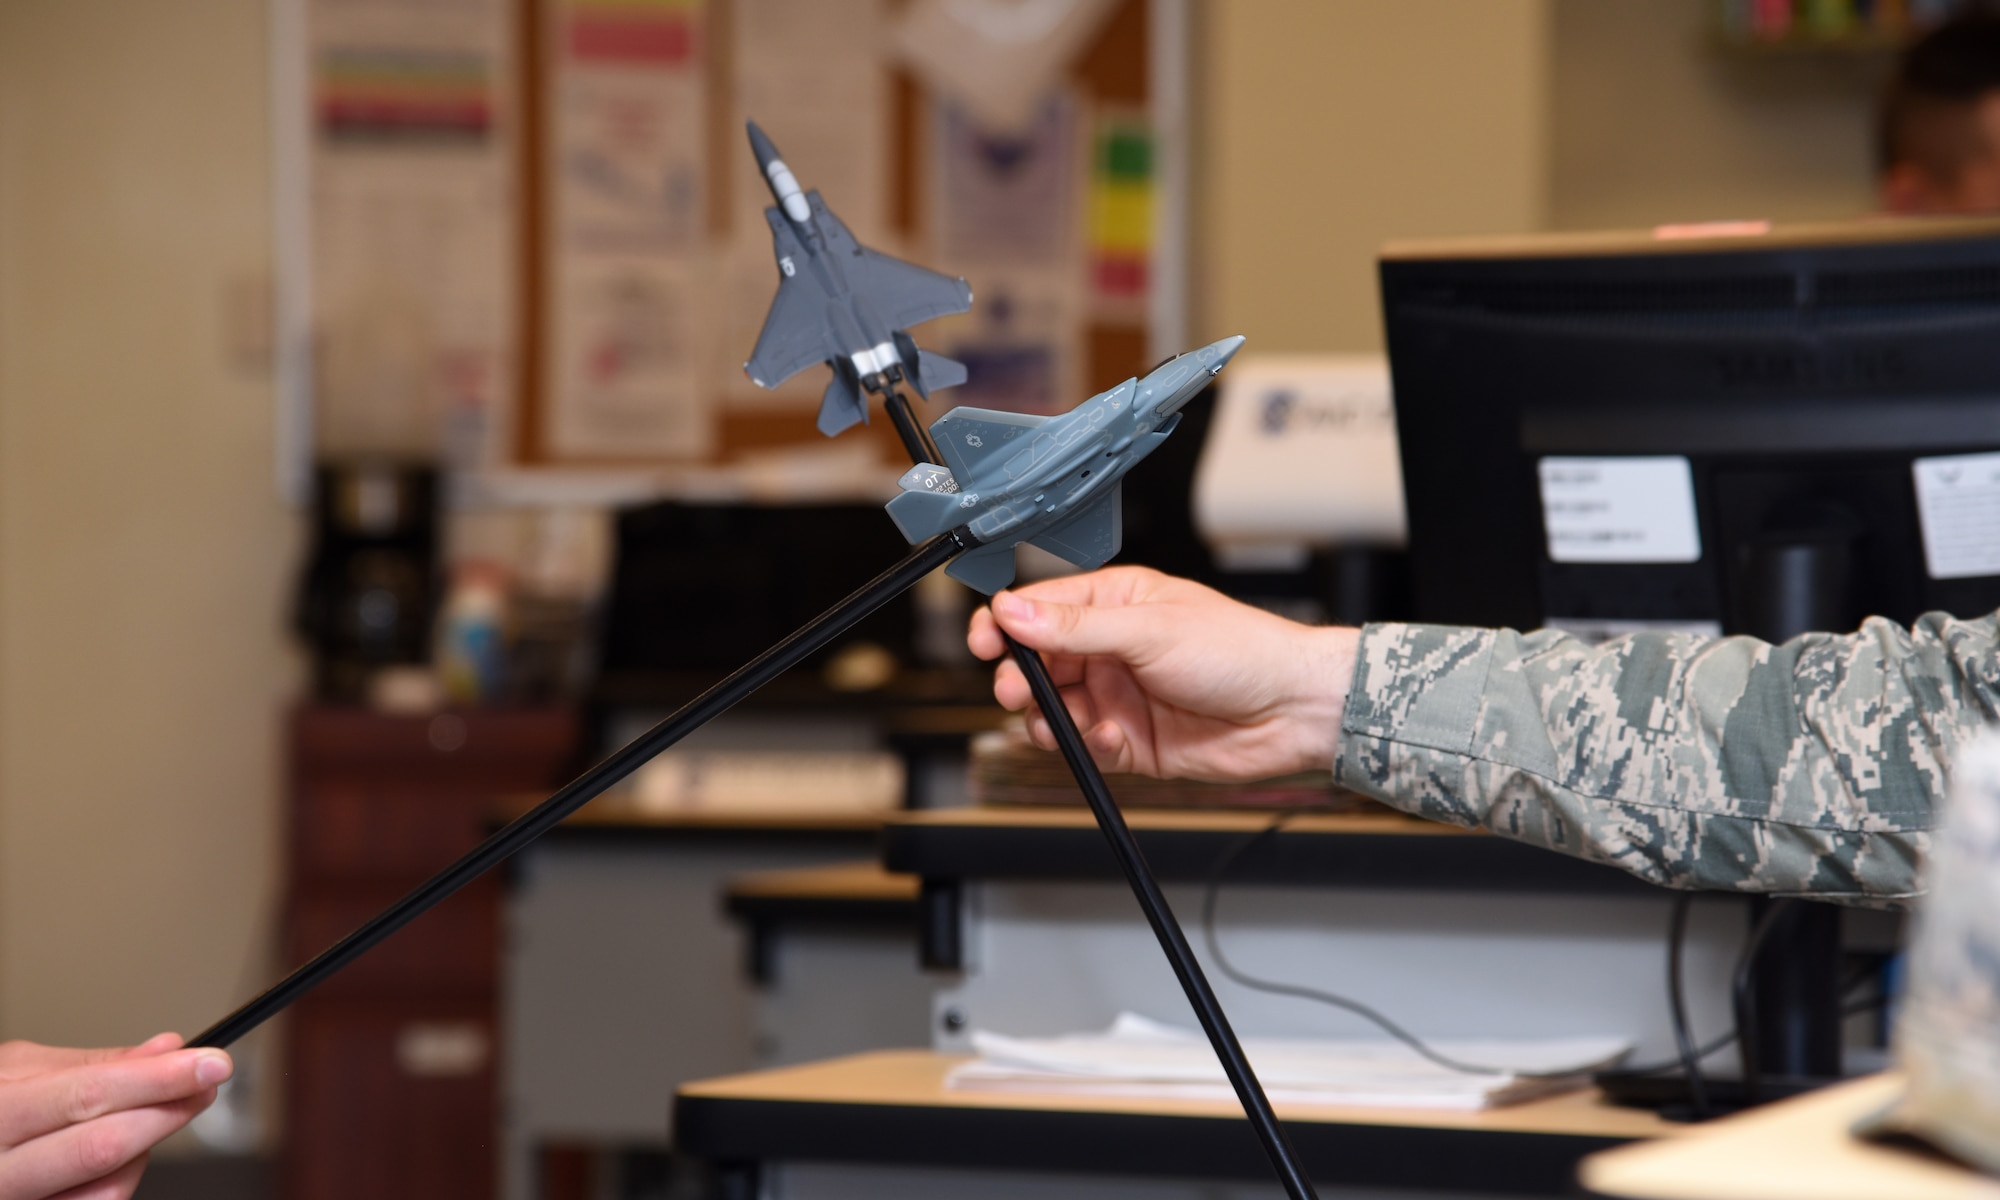 U.S. Air Force students maneuver aircraft props and talk through what-if scenarios during their weapons block in their All Source Intelligence Analyst course in Di Tommaso Hall on Goodfellow Air Force Base, Texas, July 10, 2019. The All Source Intelligence Analyst course teaches students over a 13-block period how to receive, analyze, report and disseminate information for key elements to ensure missions are completed safely and successfully. (U.S. Air Force photo by Airman 1st Class Abbey Rieves/Released)